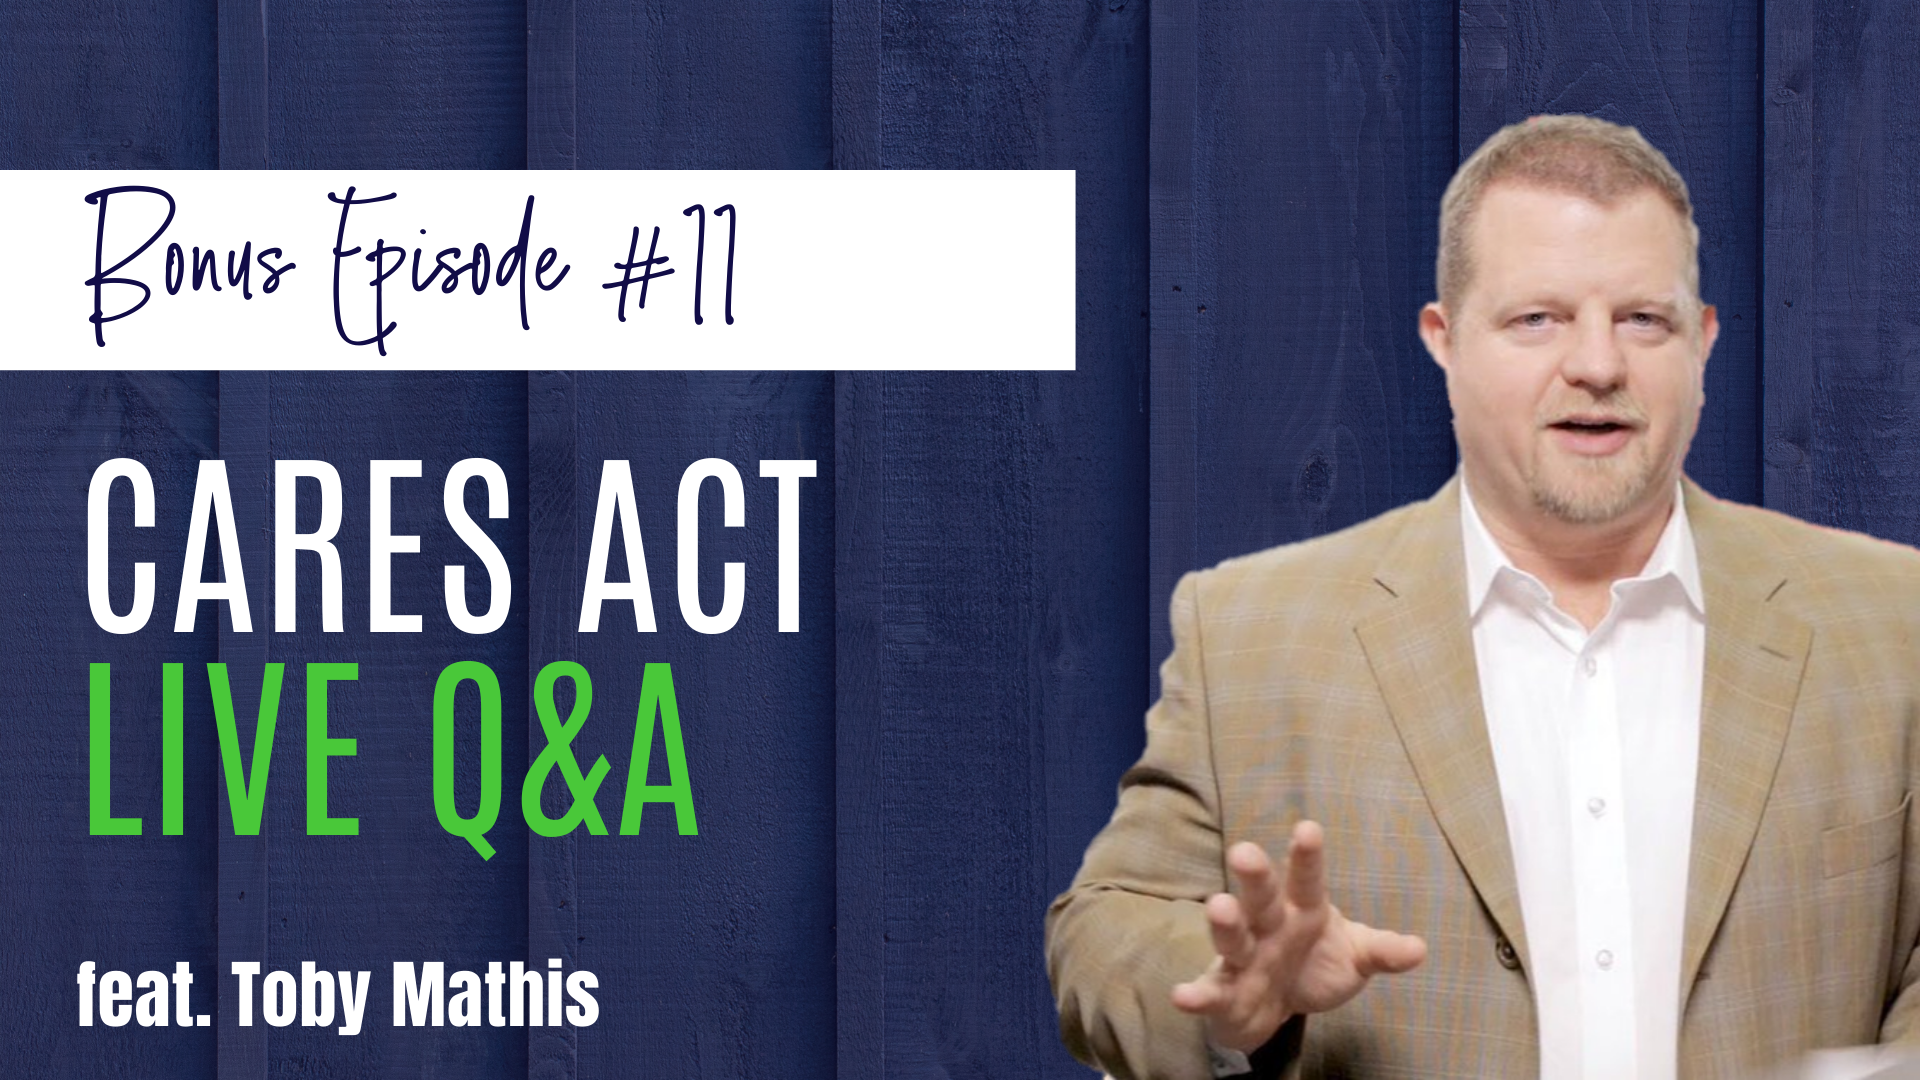 CARES Act Live Q&A feat. Toby Mathis